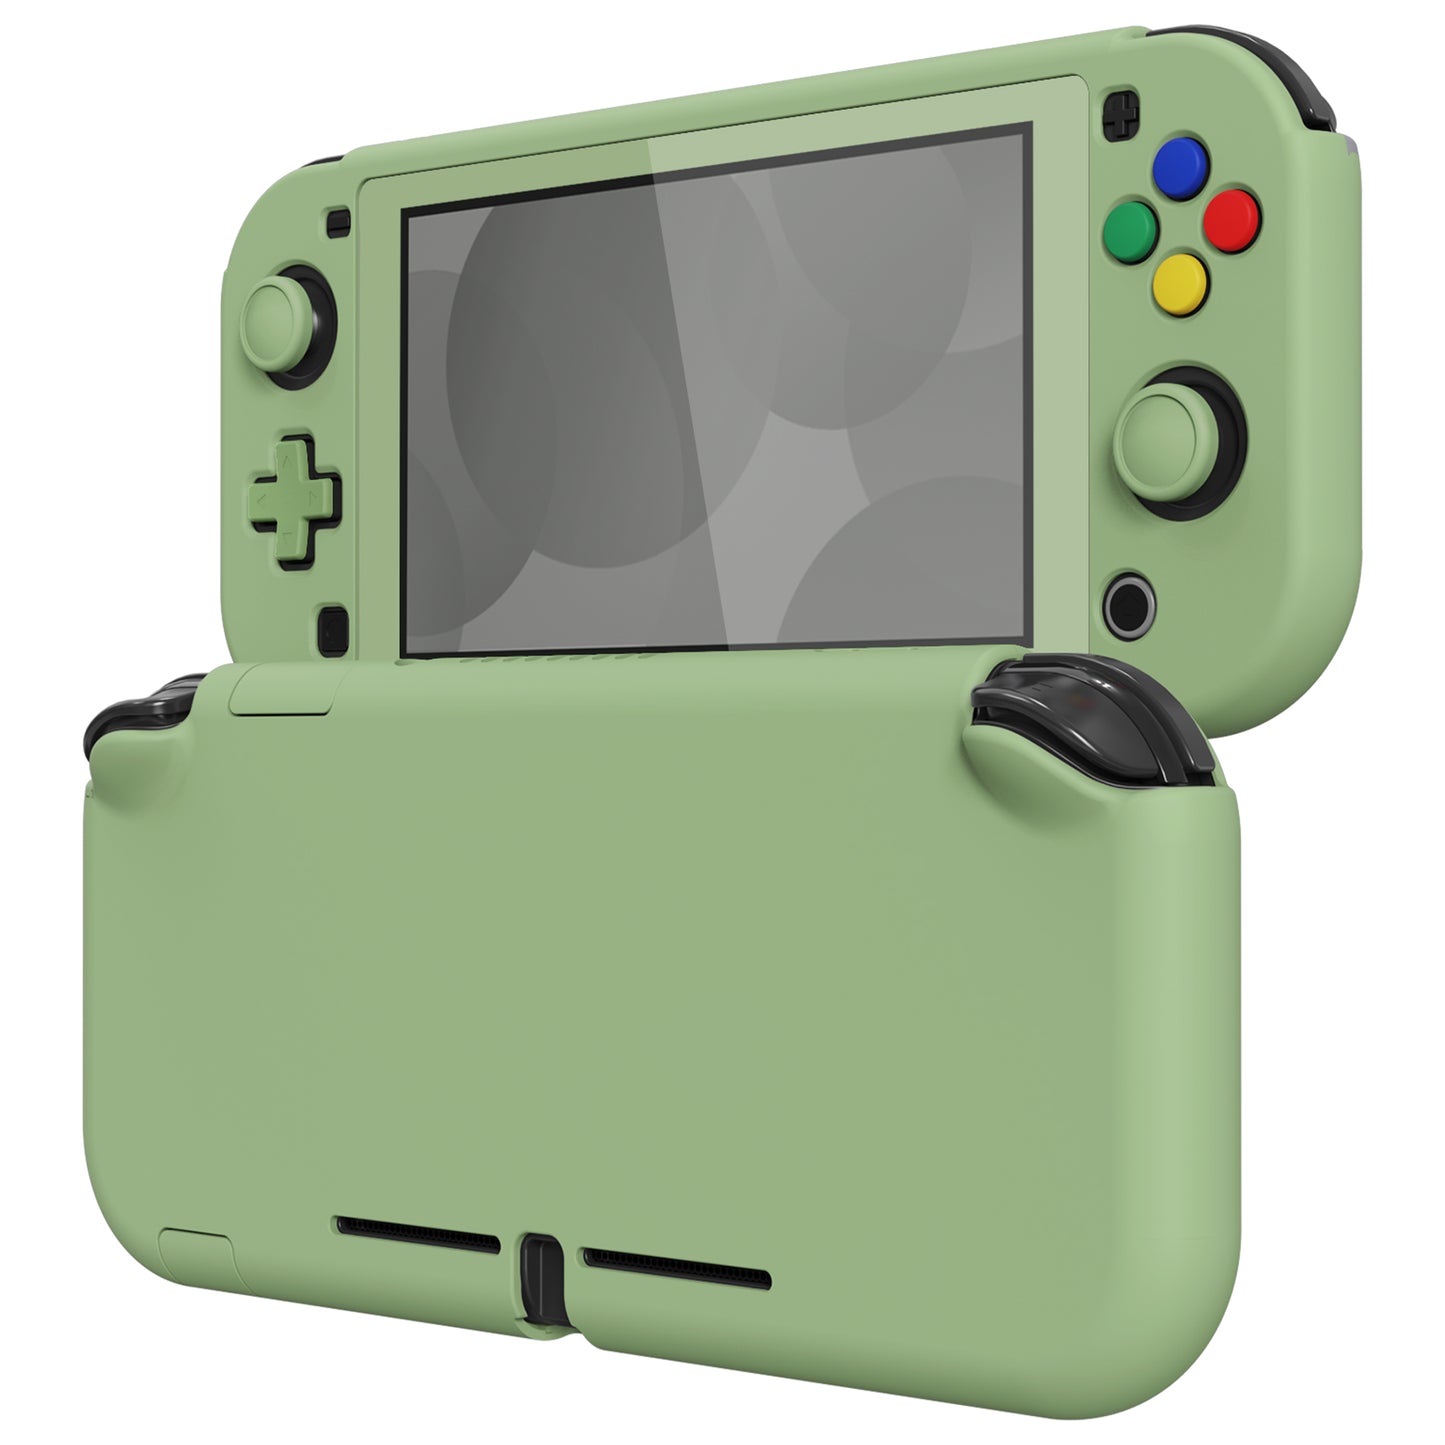 PlayVital Matcha Green Protective Case for NS Switch Lite, Hard Cover Protector for NS Switch Lite - 1 x Black Border Tempered Glass Screen Protector Included - YYNLP004 PlayVital